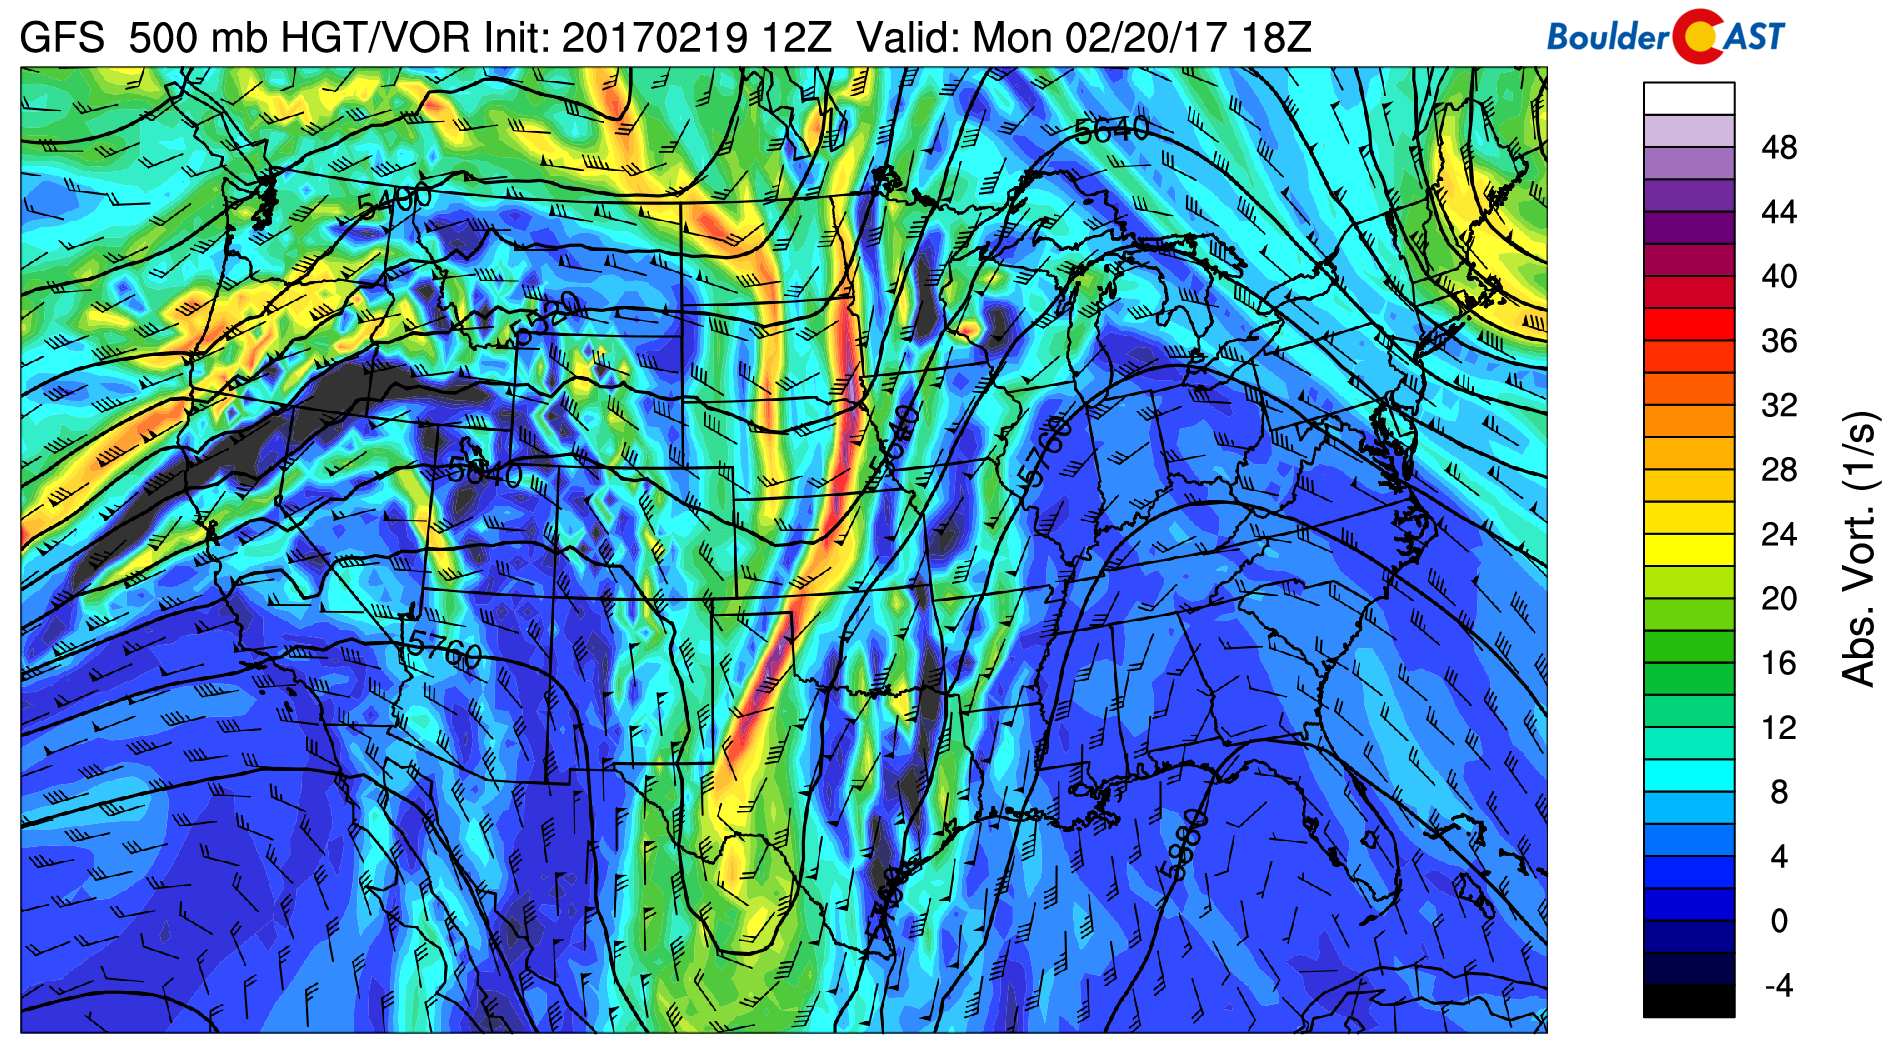 GFS 500 mb absolute vorticity and heights for today